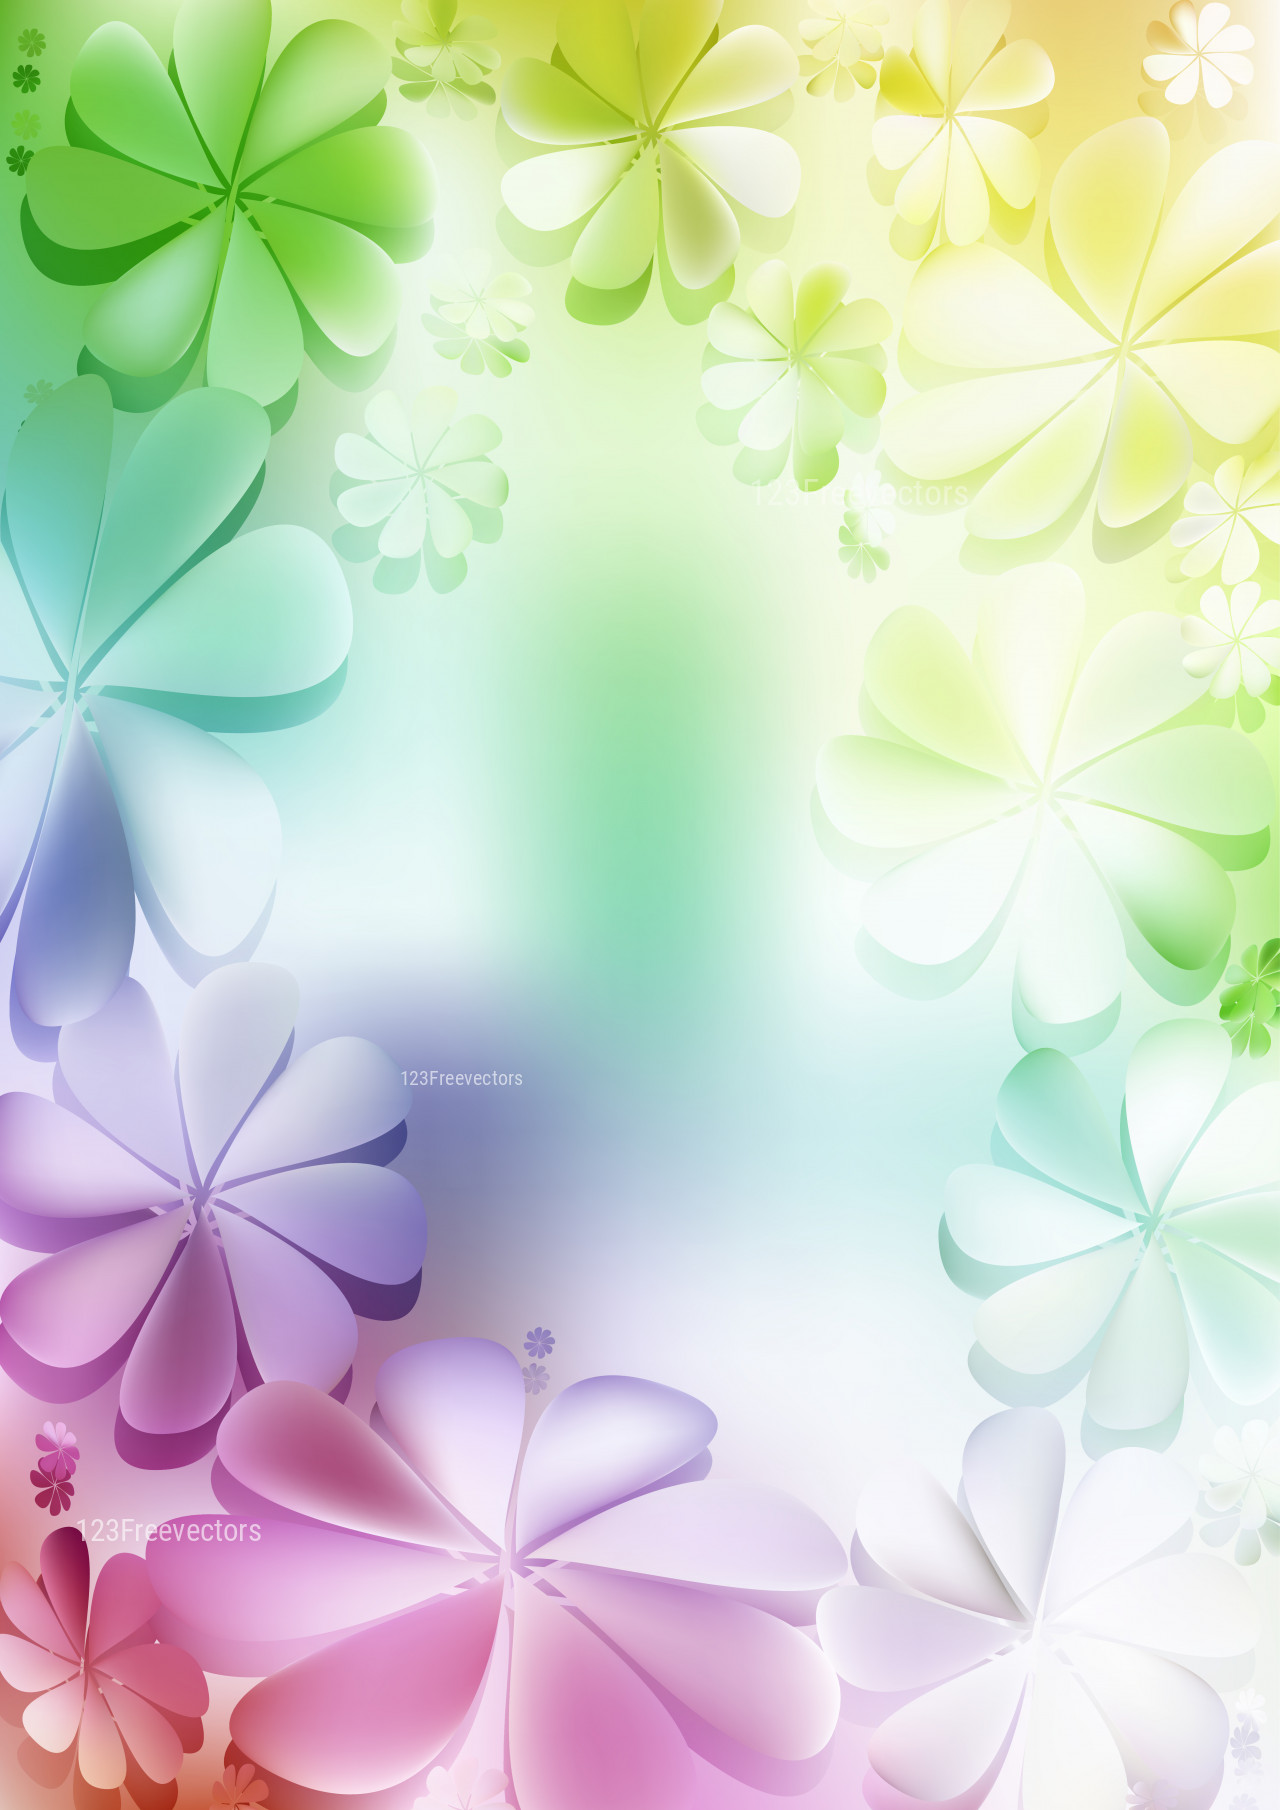 Purple Green and White Floral Background Vector Image